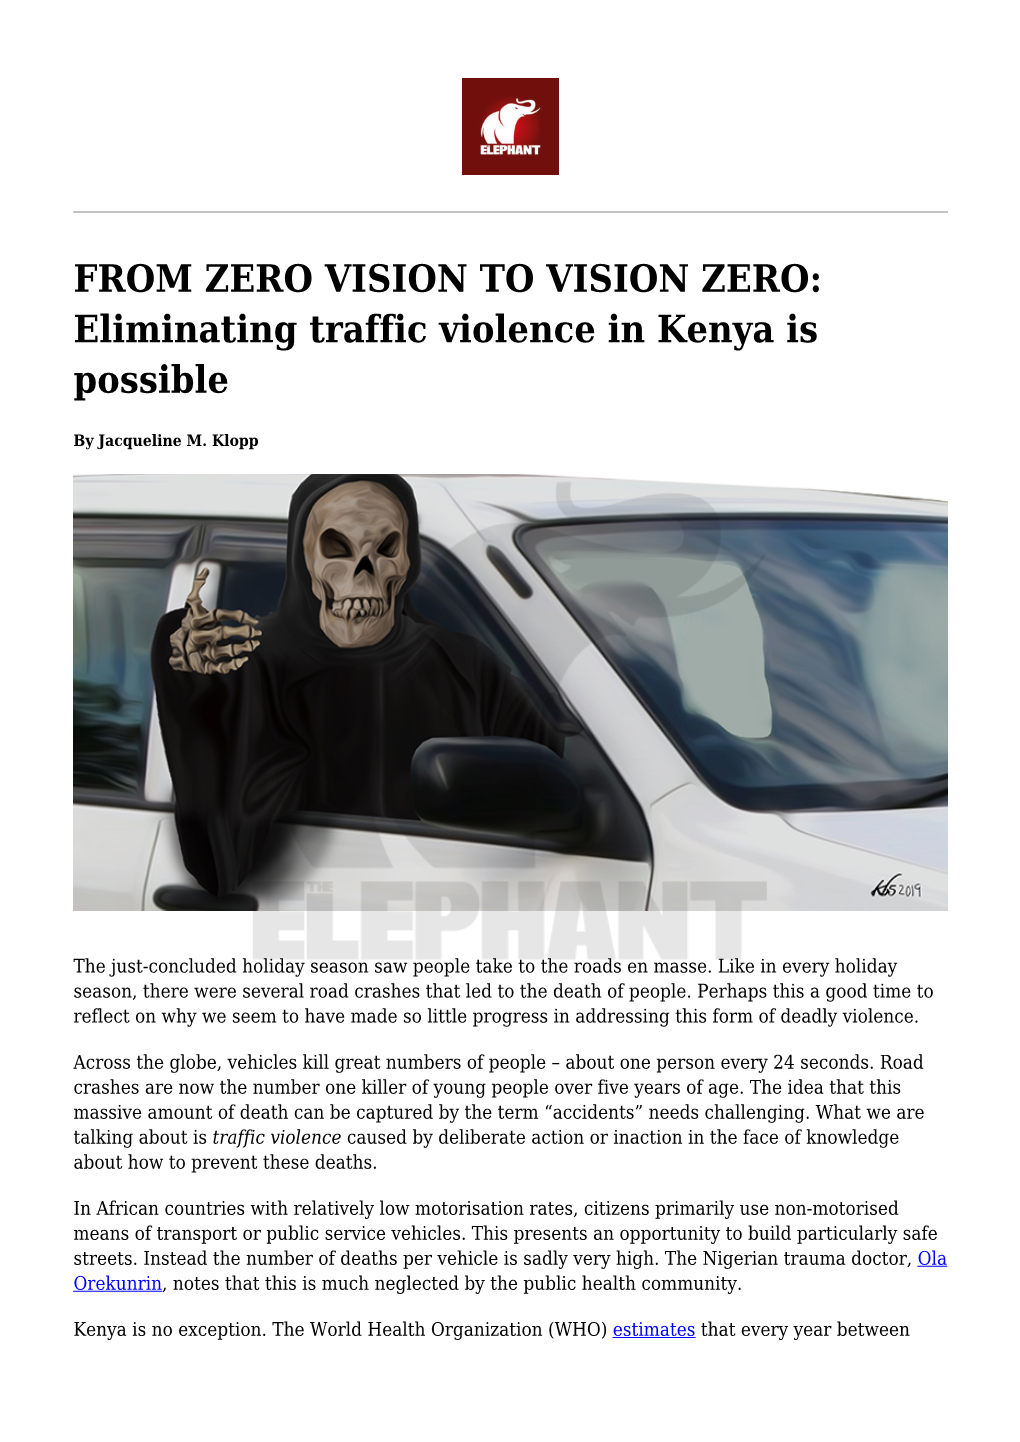 FROM ZERO VISION to VISION ZERO: Eliminating Traffic Violence in Kenya Is Possible